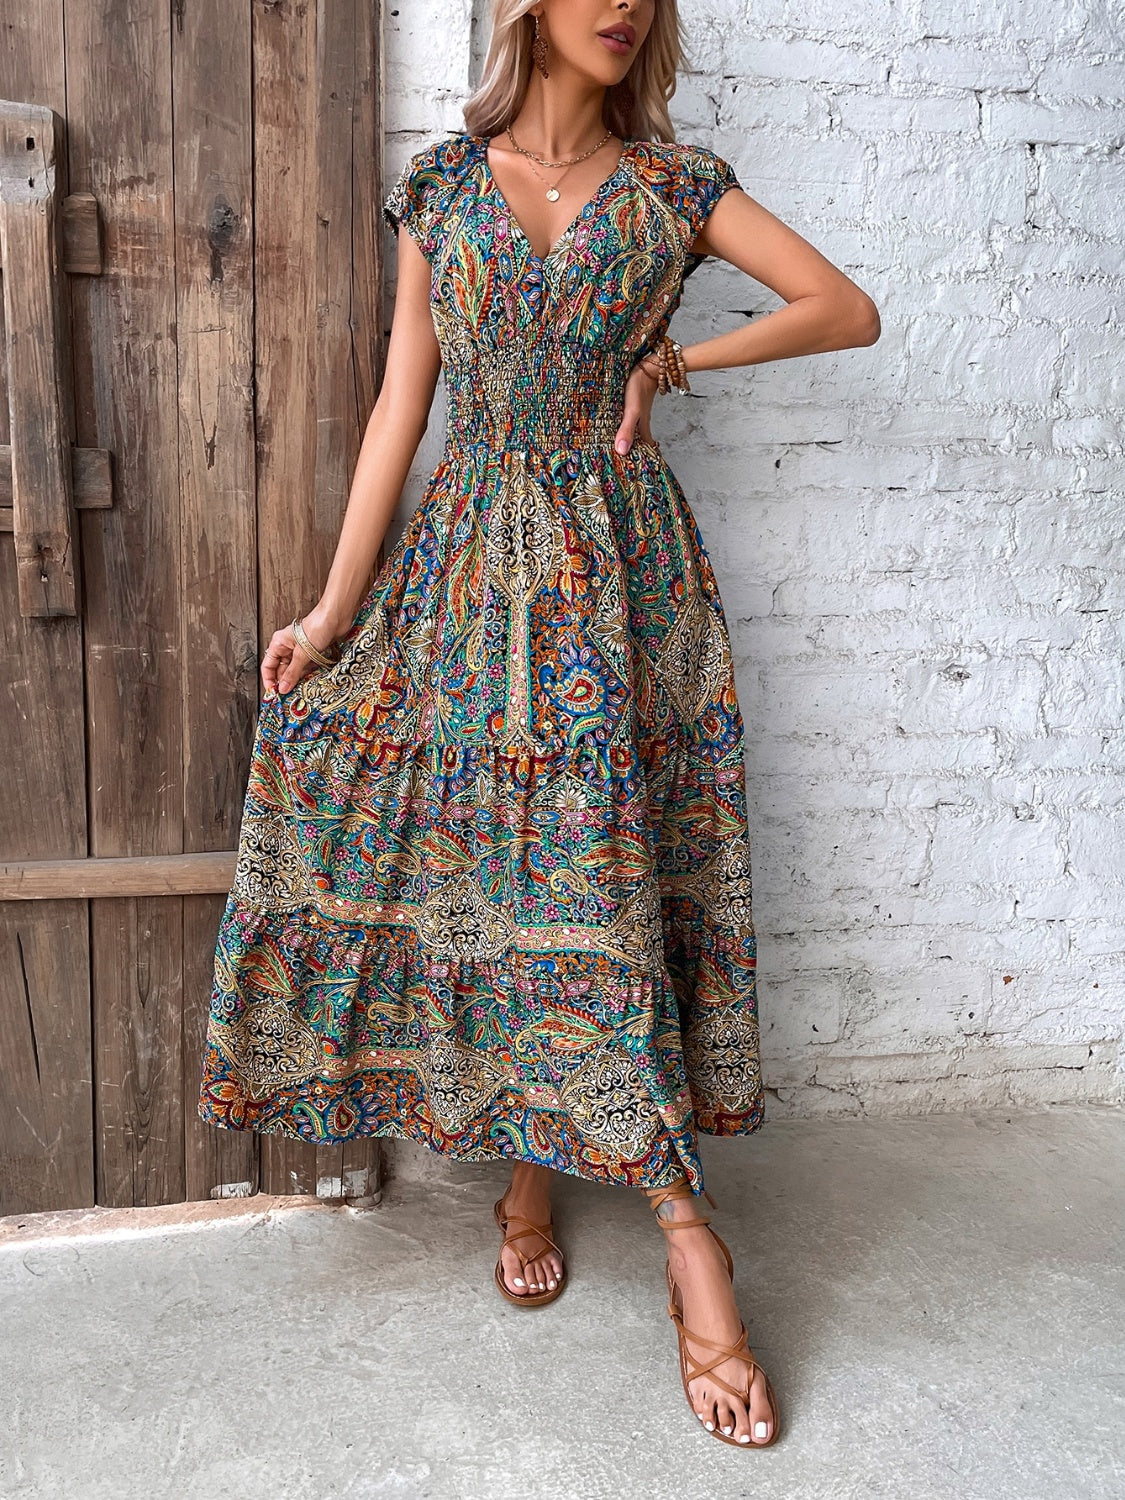 Gray Smocked Printed Cap Sleeve Midi Dress Sentient Beauty Fashions Apparel & Accessories